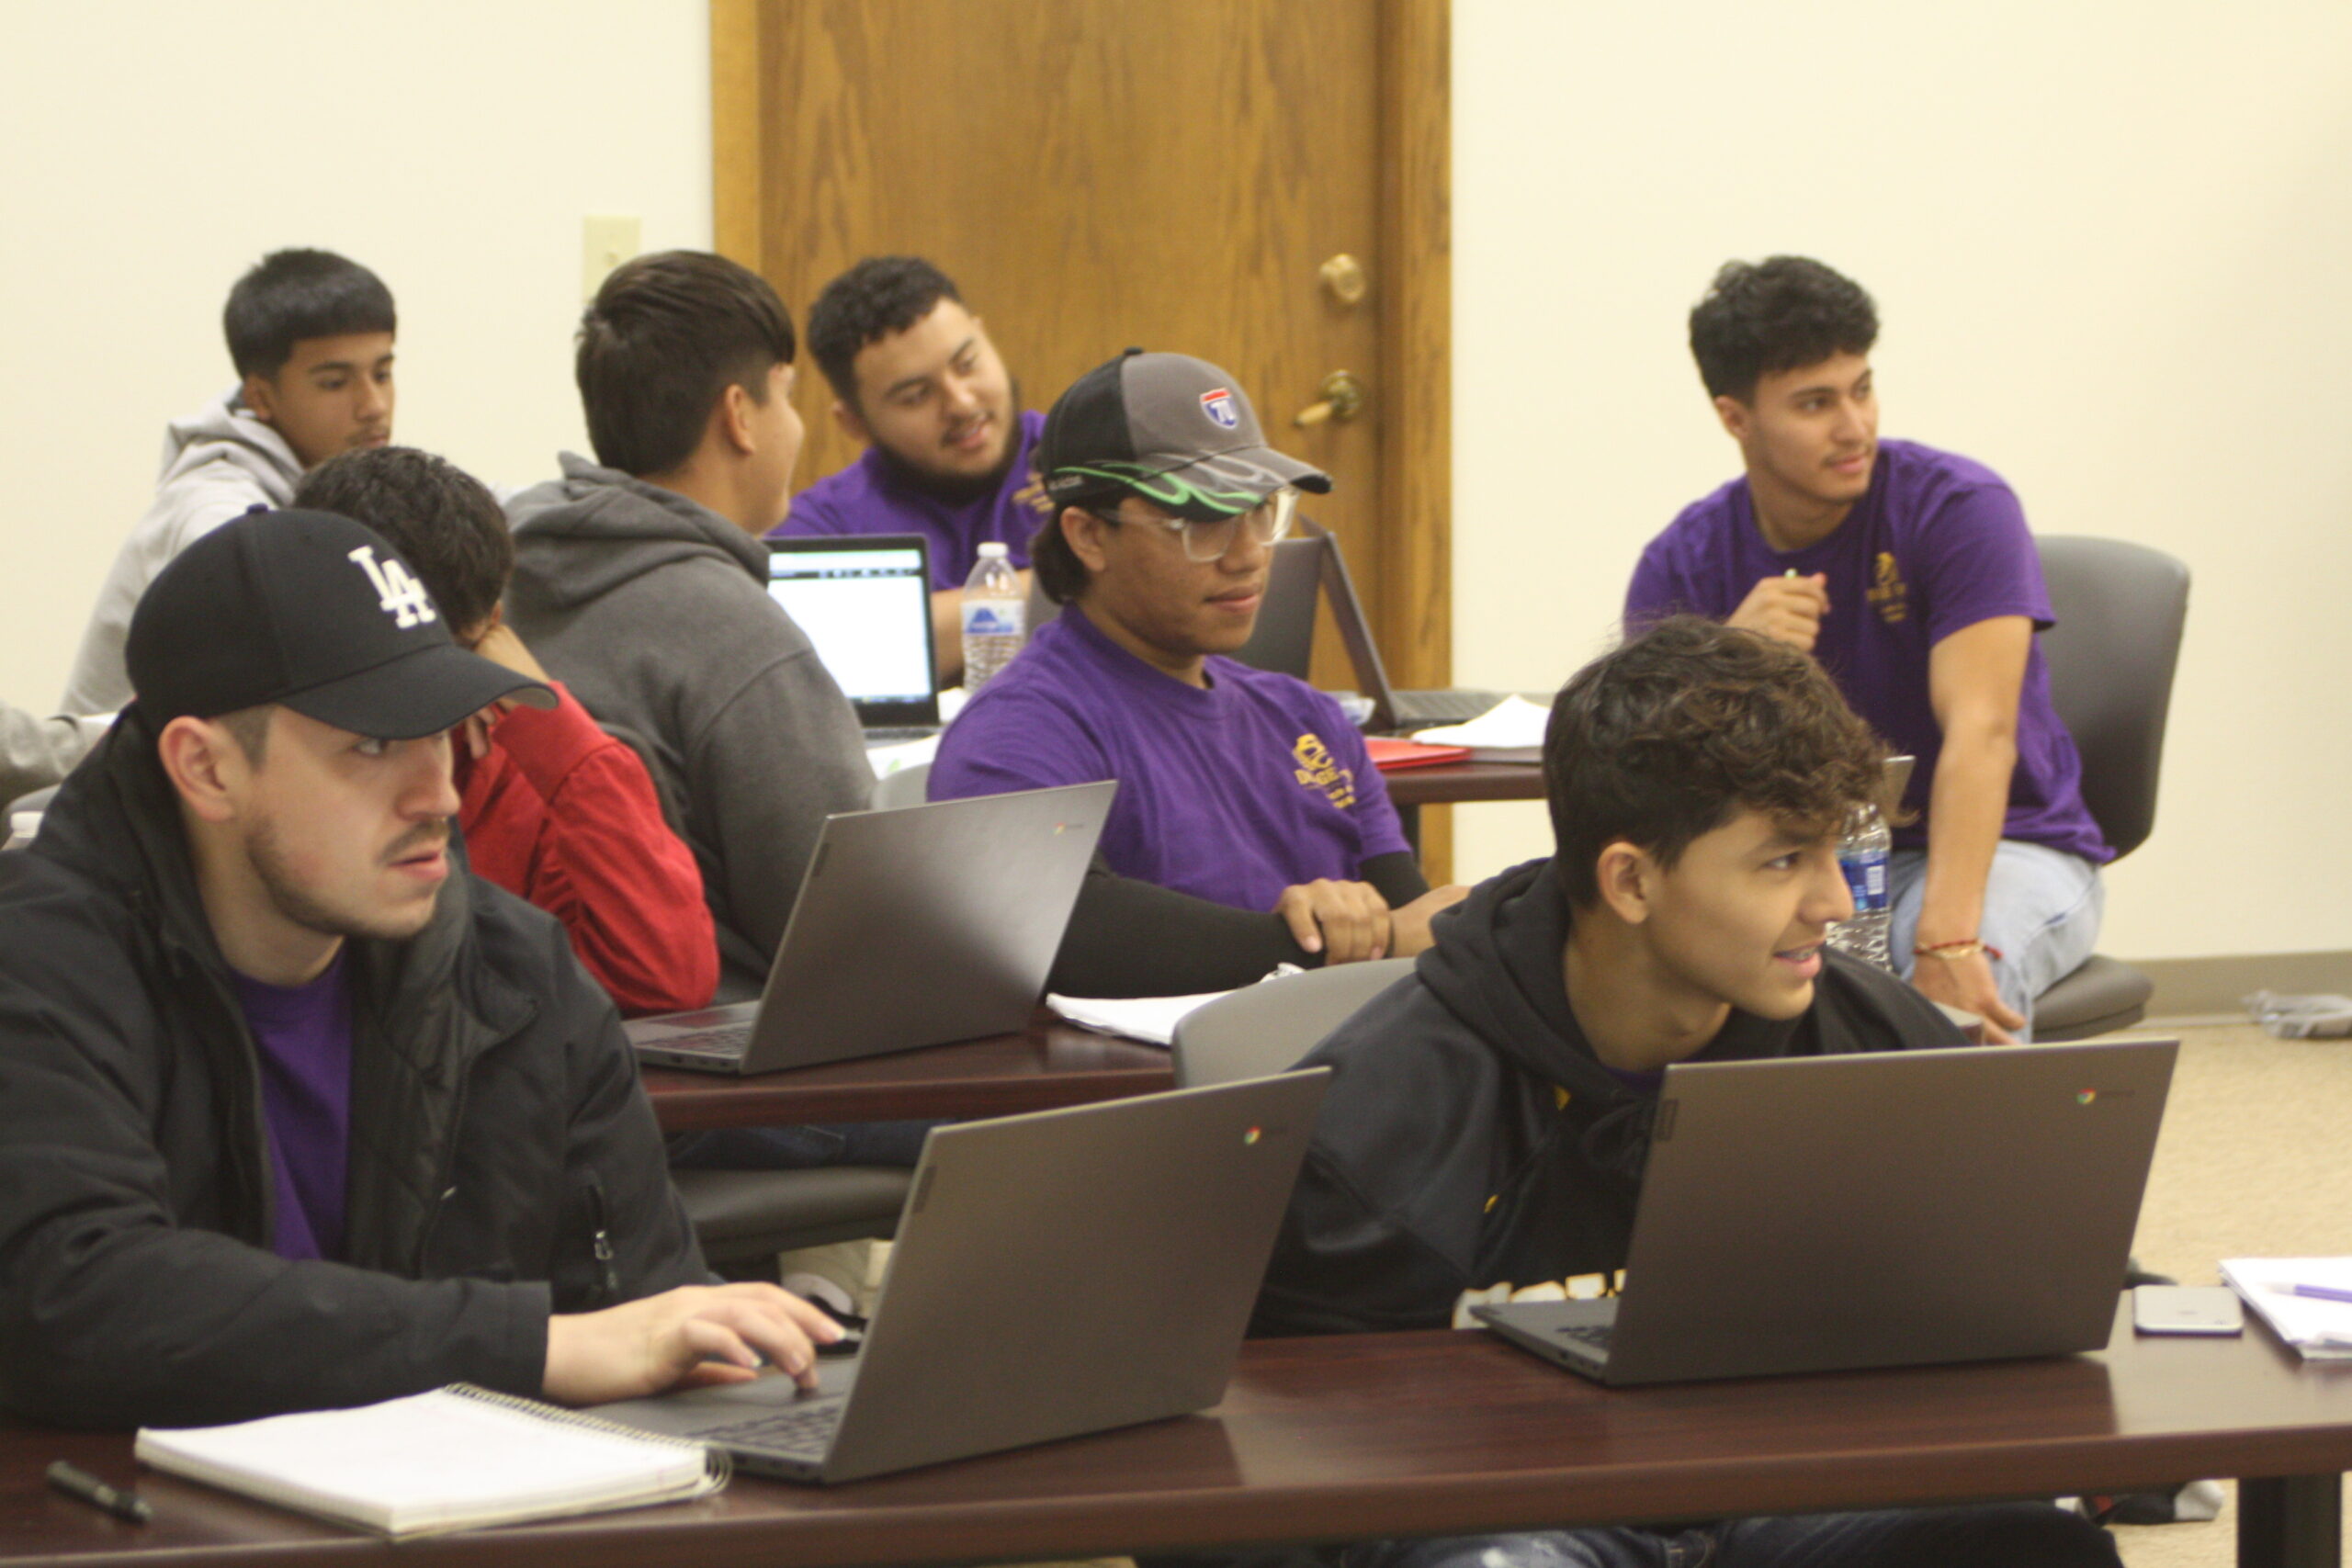 DC3 tech students participate in an HVAC class in the Chaffin building on Sept. 28. [Photo by Luke Fay]